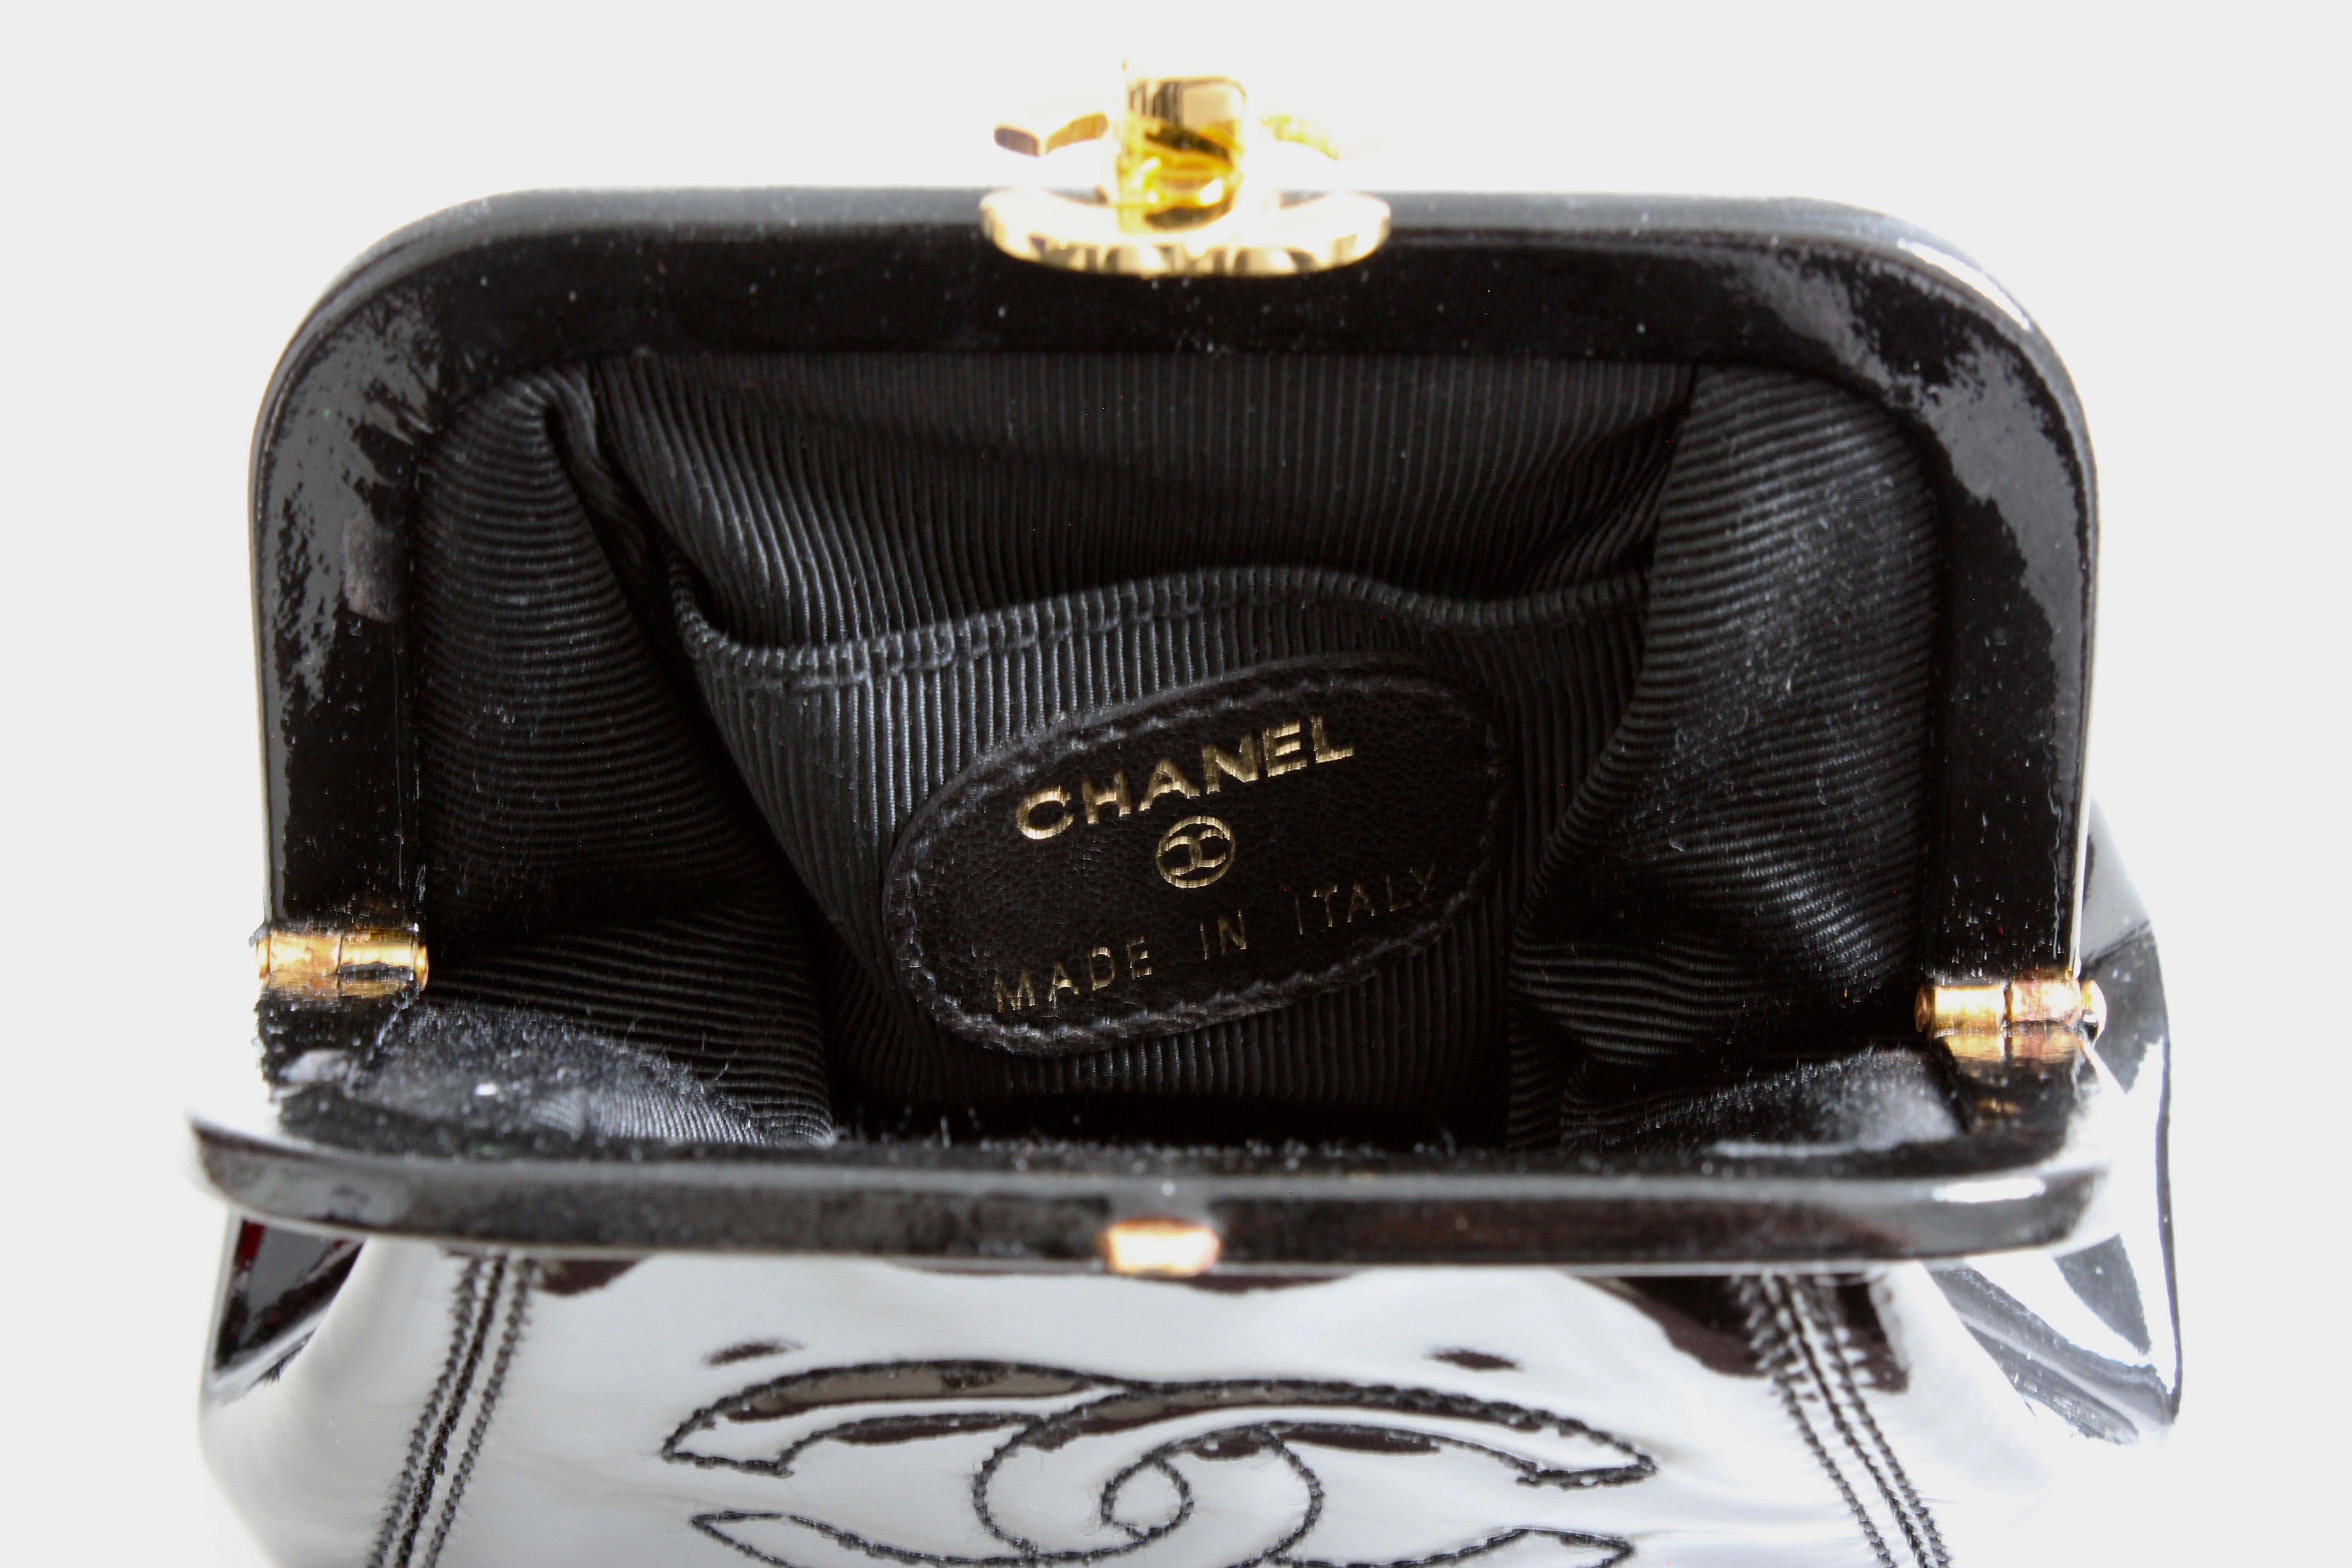 Chanel Black Patent Leather Small Coin Purse Clutch with Gold CC Clasp with Box 1